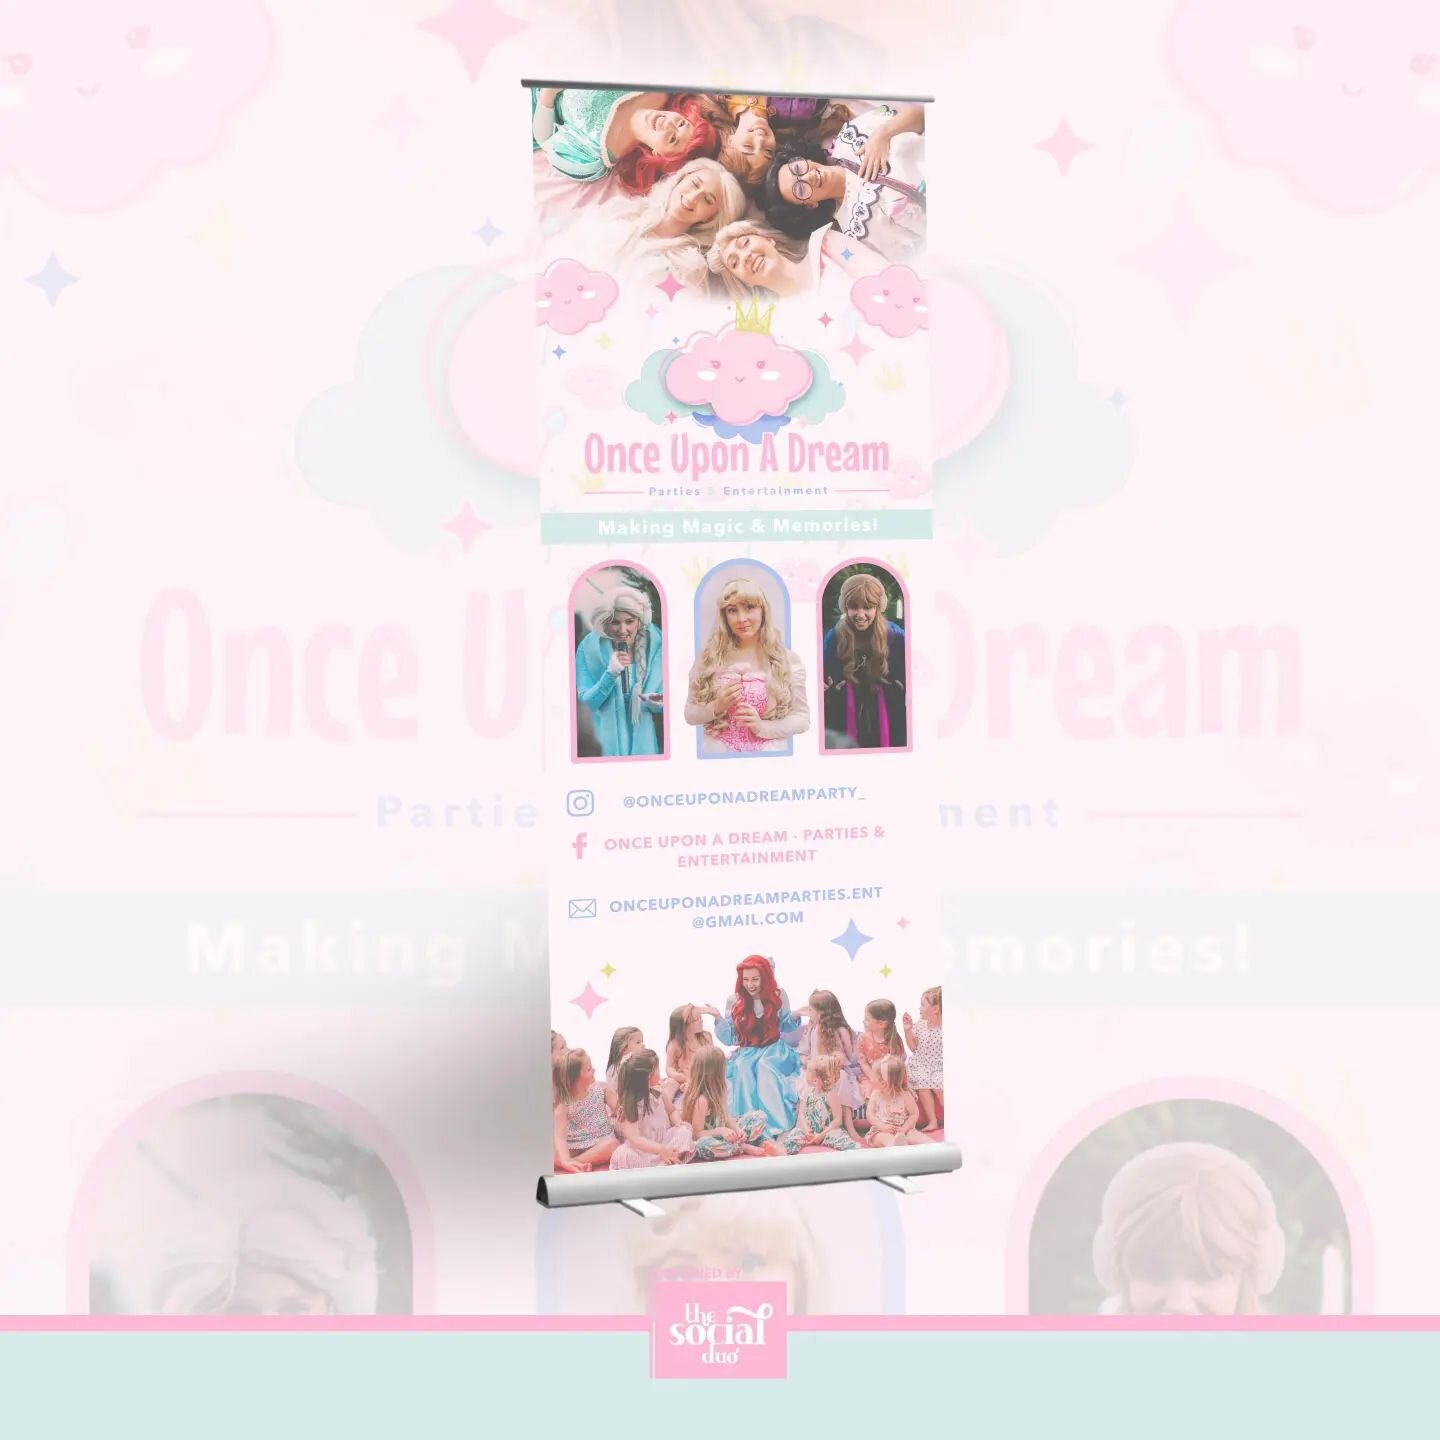 STUNNING roller banner for @onceuponadreamparty_ because their pictures and cast members are absolutely gorgeous.

Also, we are still obsessed with this branding. It's so fun and cute but sooo memorable too.

Behide the scenes at the moment is so muc